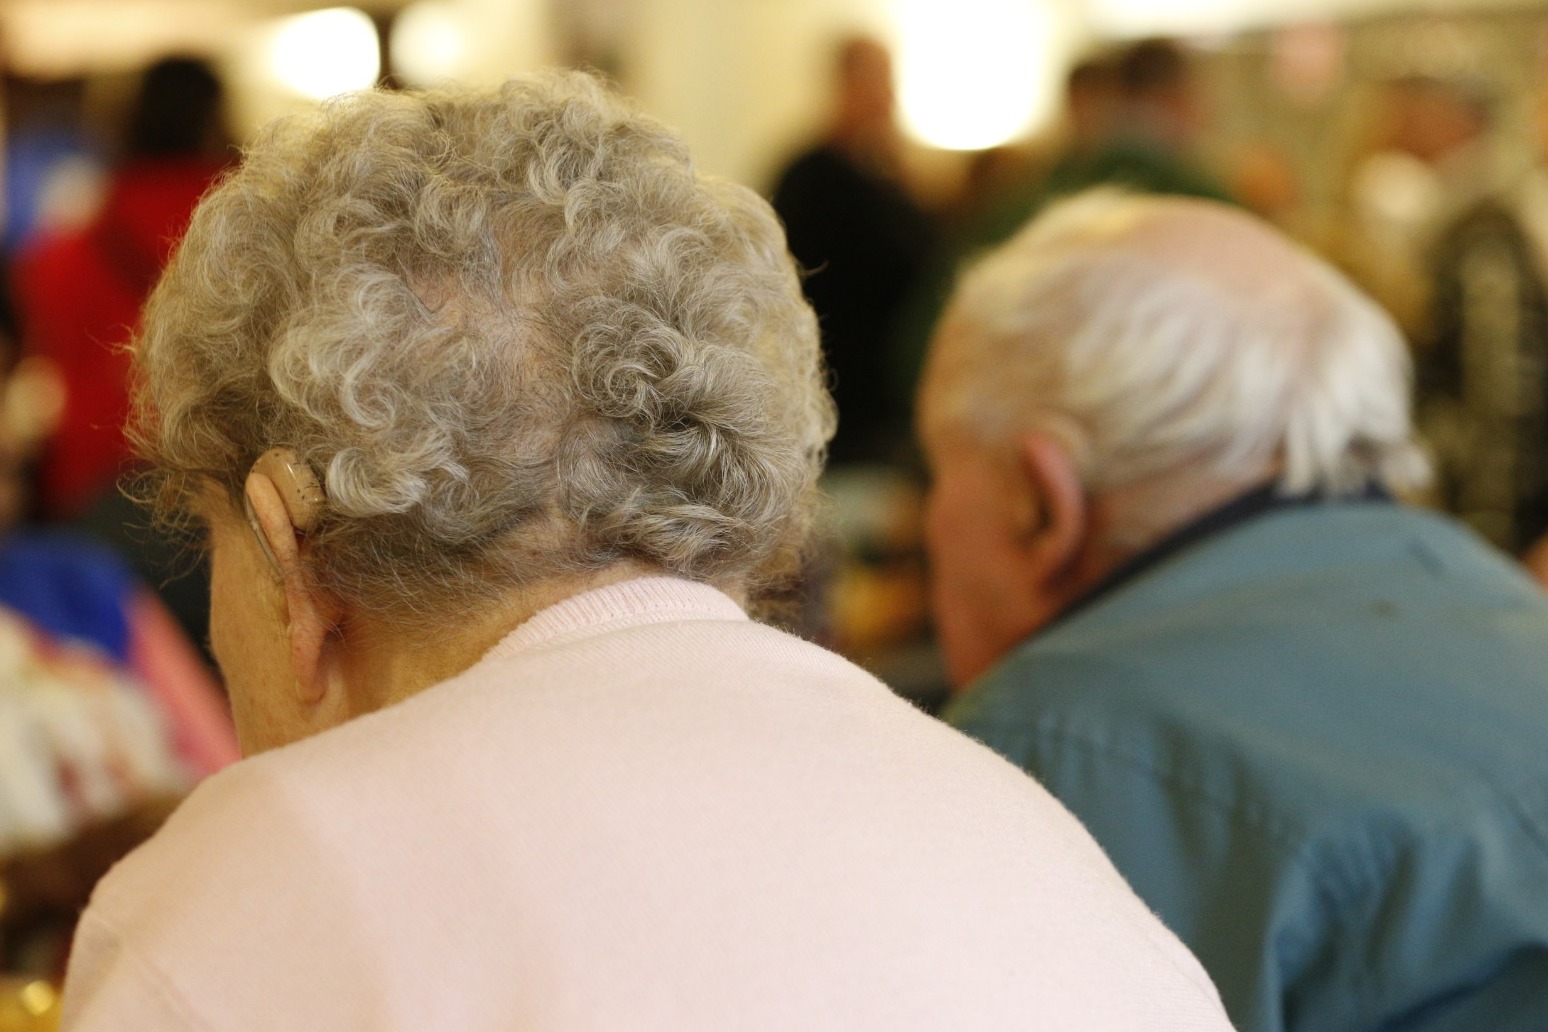 Adult social care services braced for ‘most challenging year ever’ – Adass 